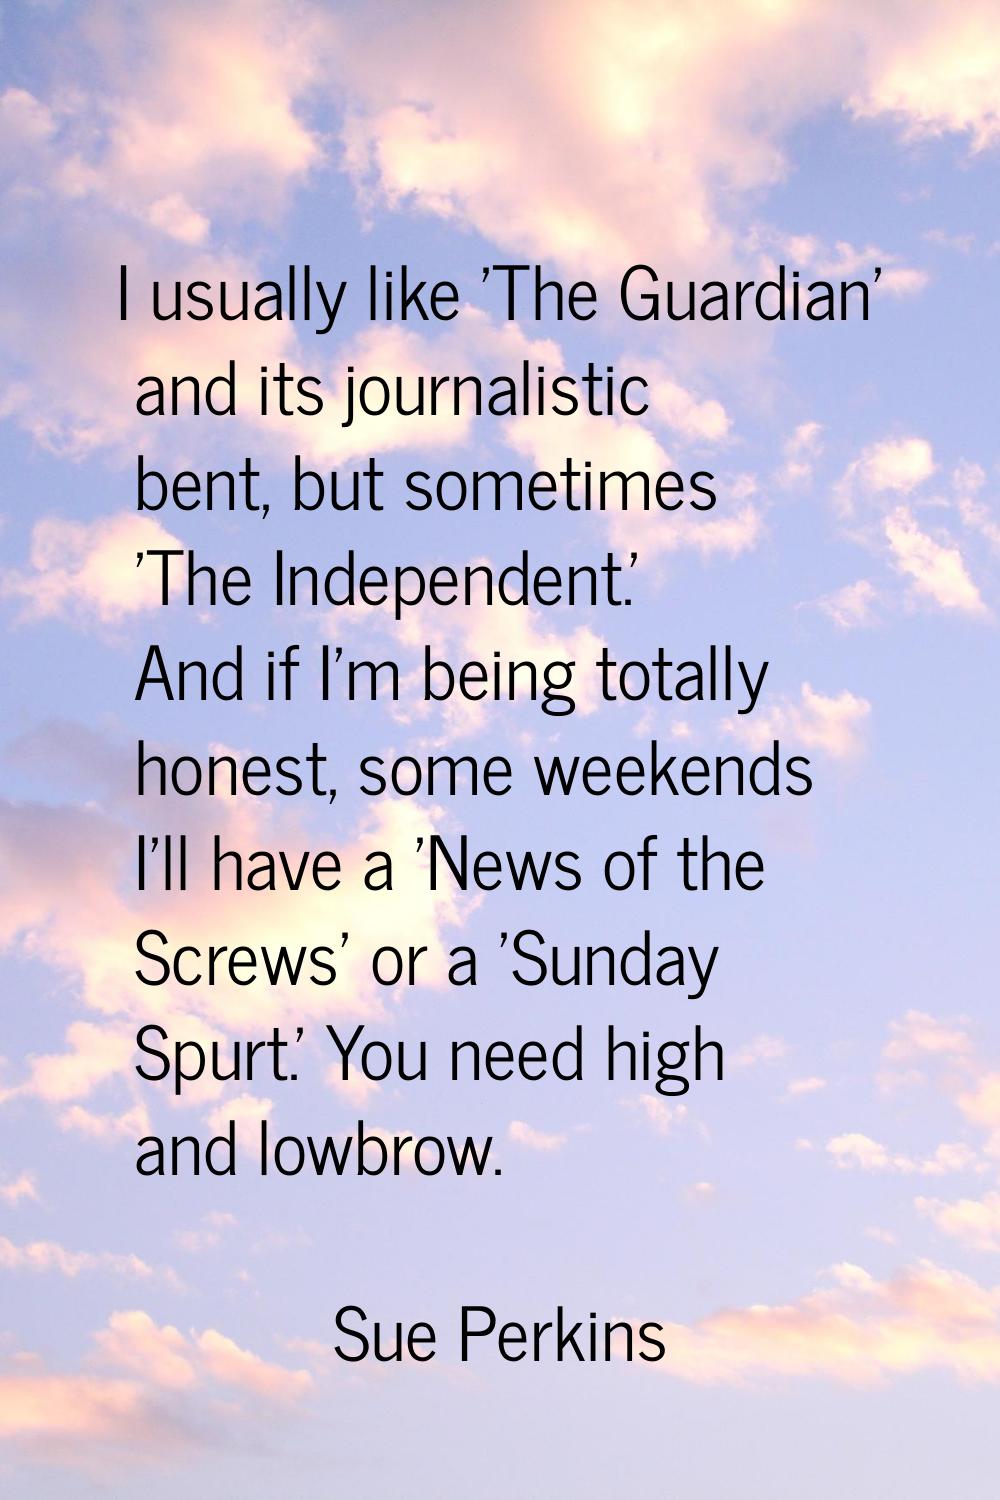 I usually like 'The Guardian' and its journalistic bent, but sometimes 'The Independent.' And if I'